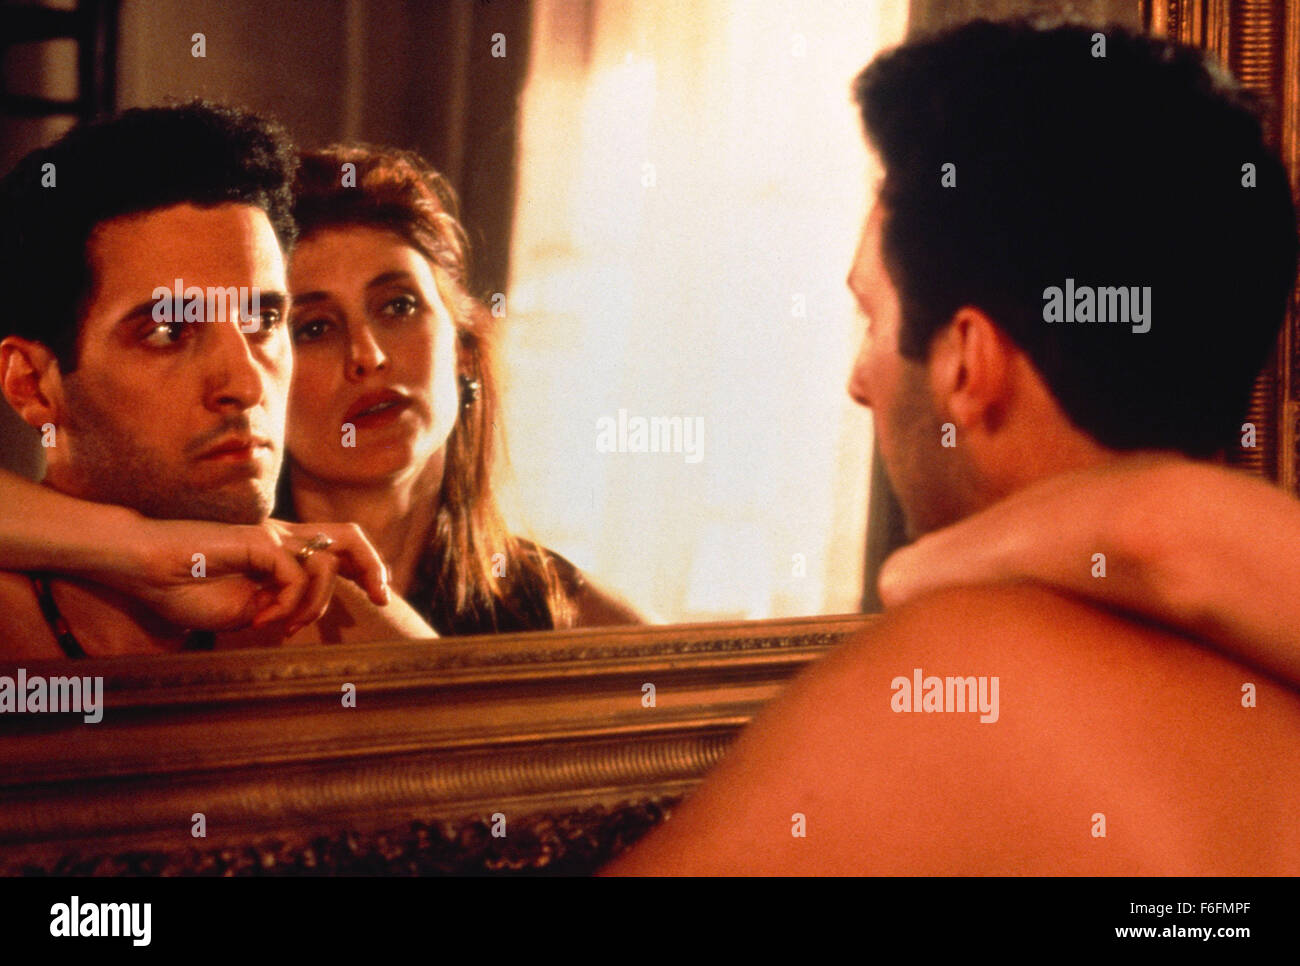 RELEASE DATE: 18 January 1991. MOVIE TITLE: Men of Respect - STUDIO: Grandview Avenue Pictures. PLOT: A hitman heeds a spiritualist's prophesies that he will rise to the head of his family. PICTURED: JOHN TURTURRO as Mike Battaglia and KATHERINE BOROWITZ as Ruthie Battaglia. Stock Photo